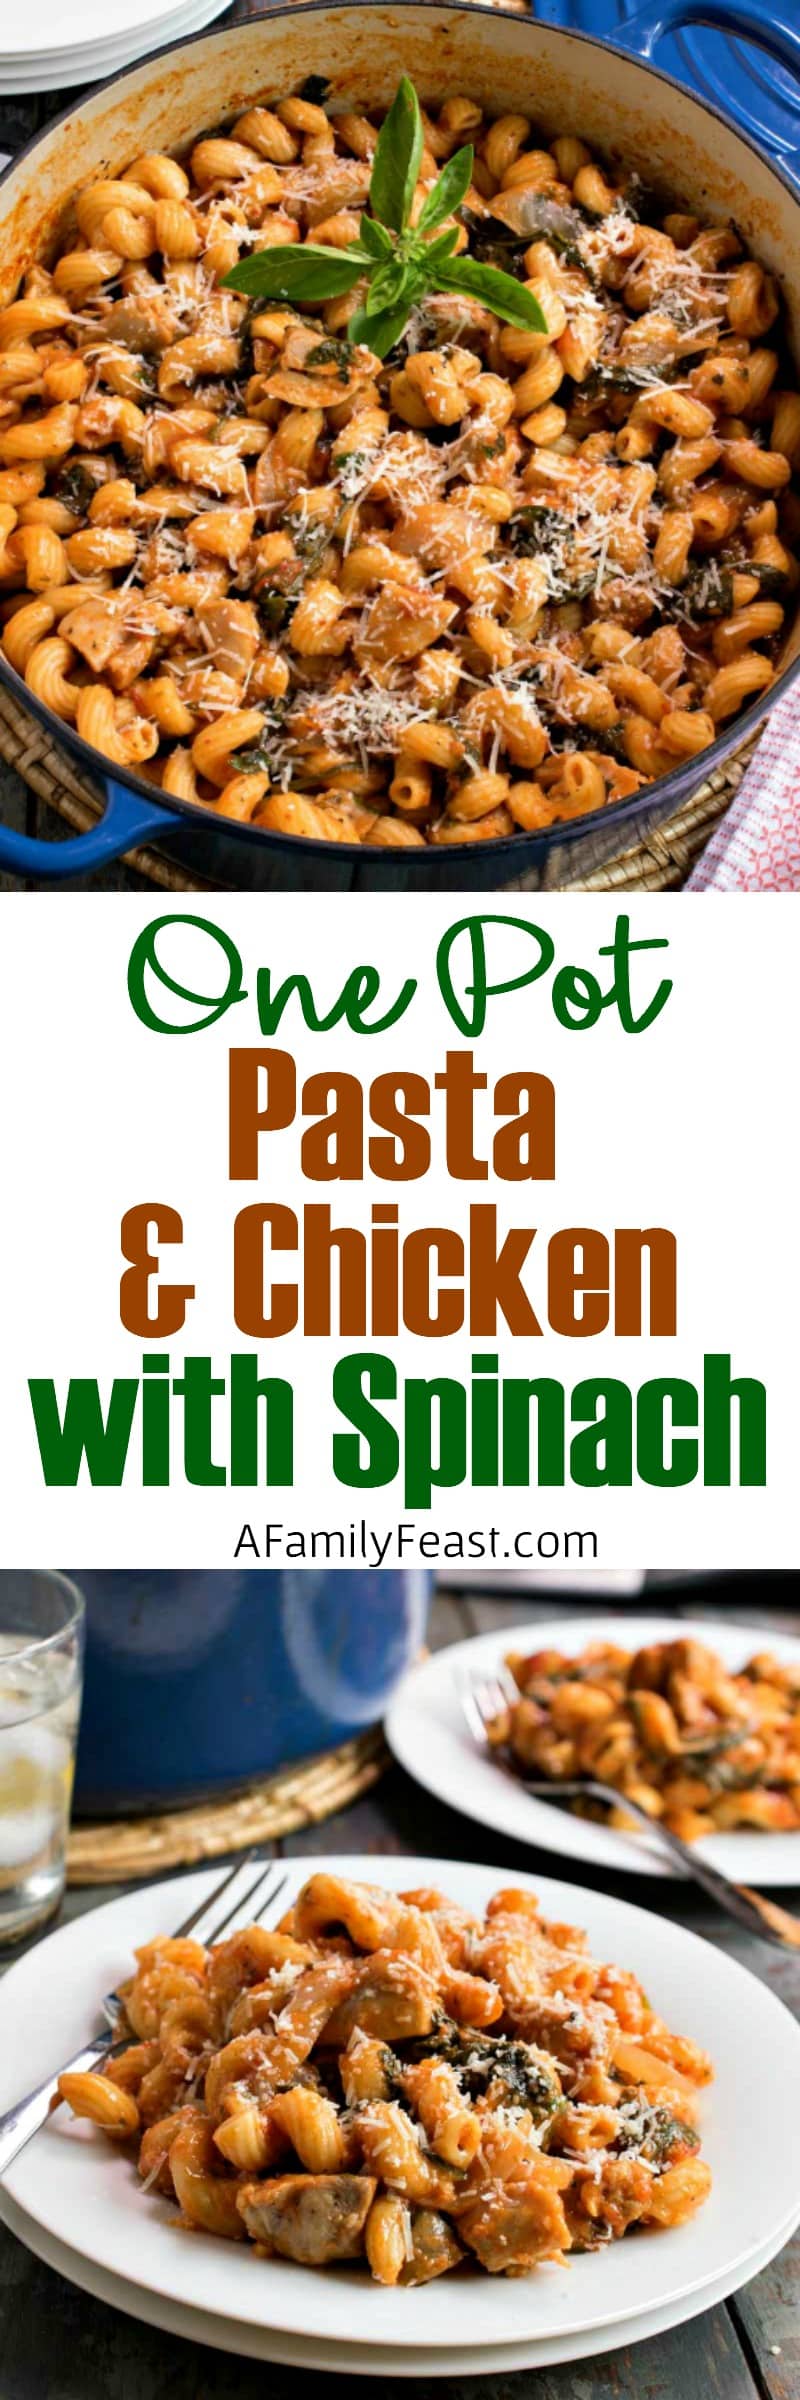 One Pot Pasta and Chicken with Spinach - This hearty pasta dish cooks up in just one pot. Easy to make, easy to clean up!